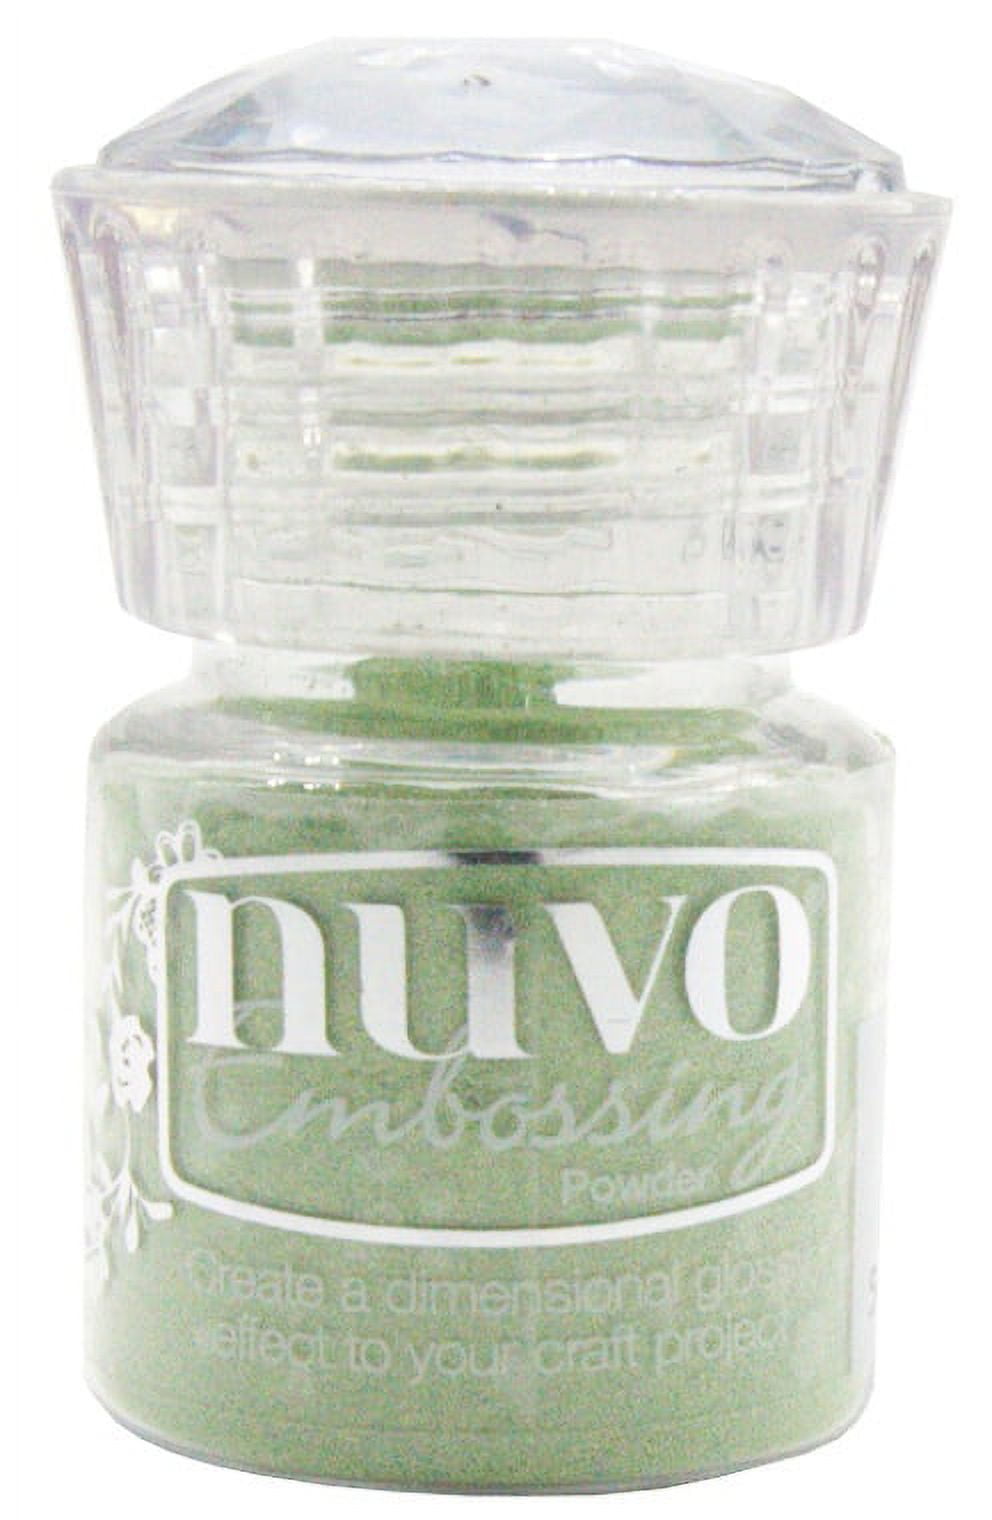 Nuvo Embossing Powder .74oz-Coral Chic